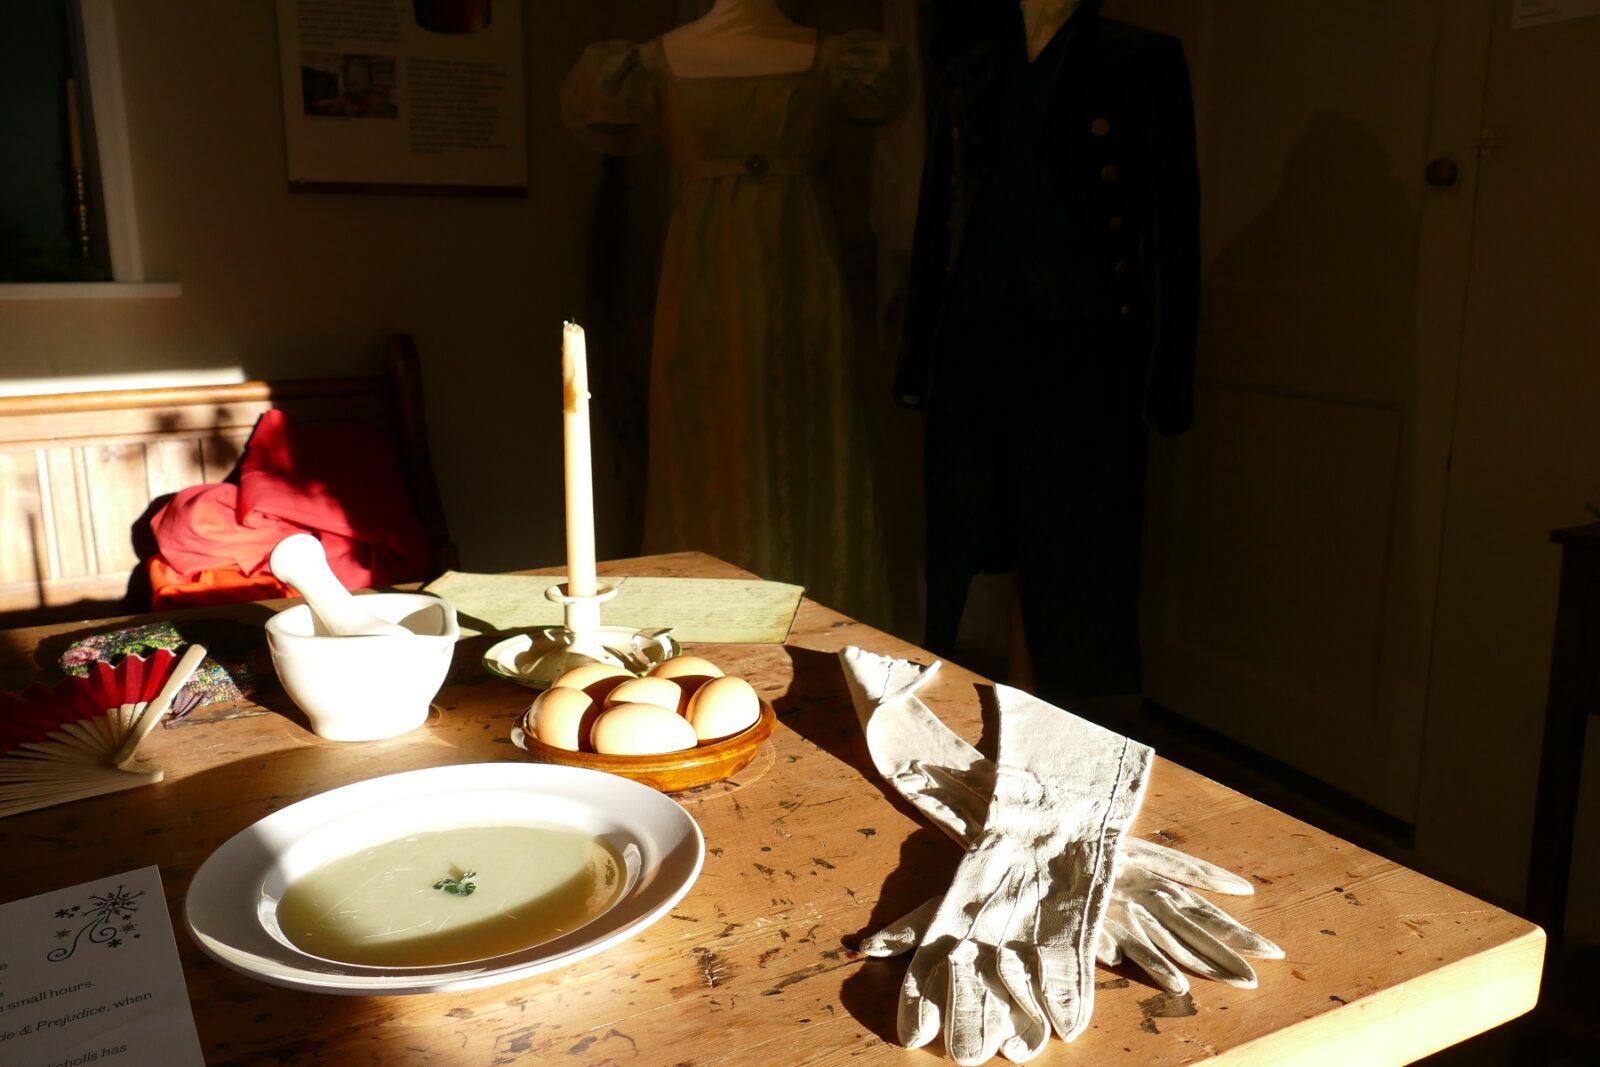 A bowl of White Soup in the Historic Kitchen at Jane Austen's House